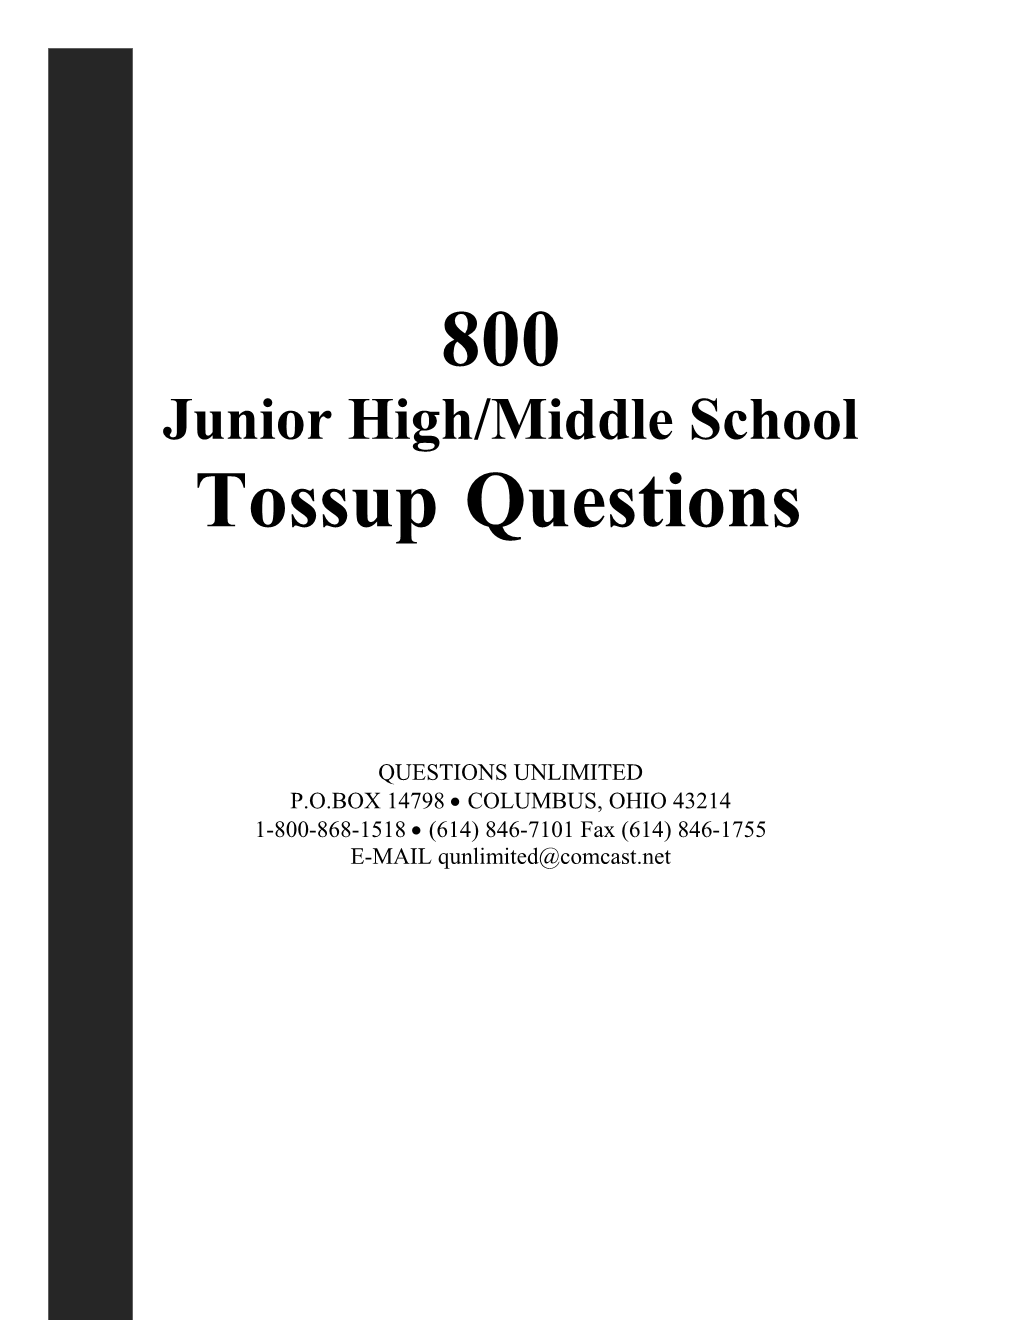 Junior High/Middle School Tossupquestions